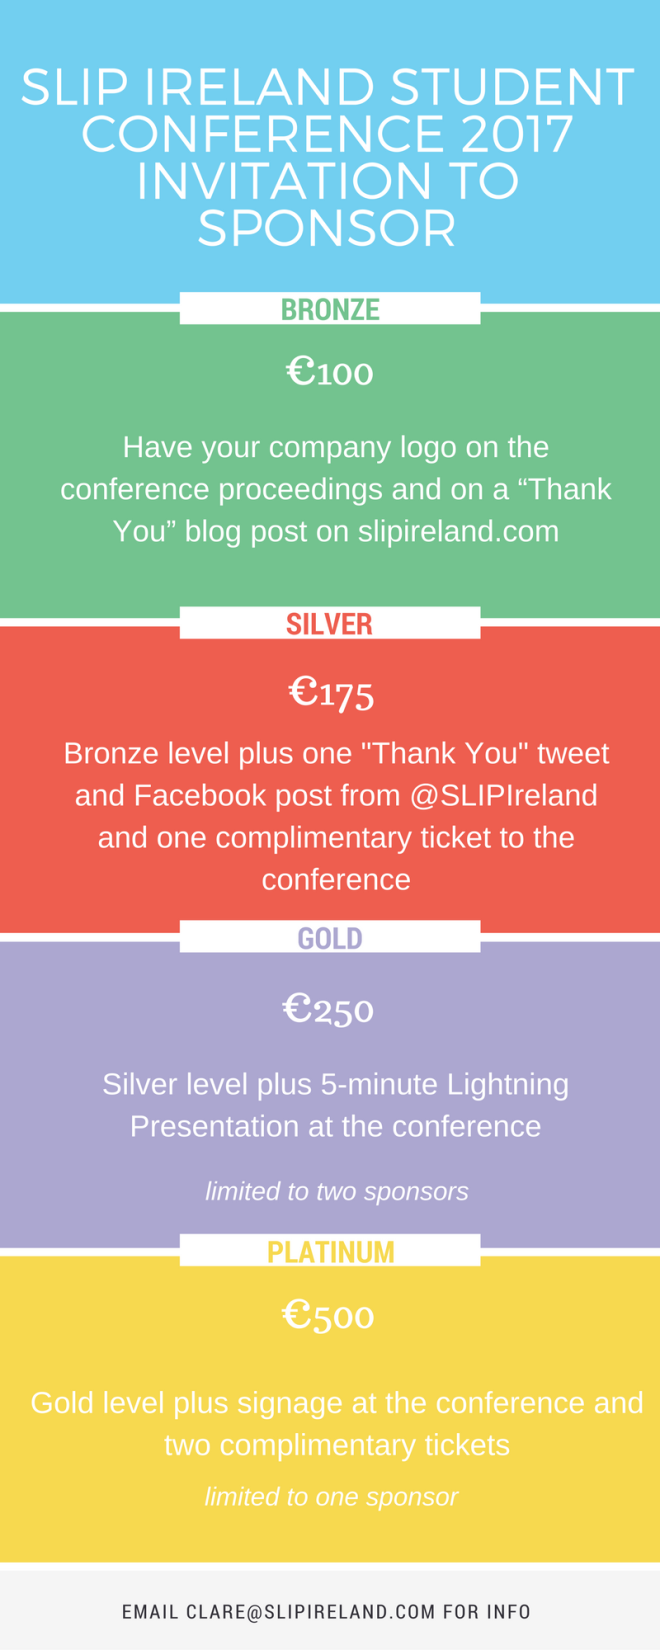 SLIP Ireland Conference 2017 Invitation to Sponsor. Bronze €100 Have your company logo on the conference proceedings and on a “Thank You” blog post on slipireland.com. Silver €175 Bronze level plus one "Thank You" tweet and Facebook post from @SLIPIreland and one complimentary ticket to the conference. Gold €250 Silver level plus 5-minute Lightning Presentation at the conference. Limited to two sponsors. Platinum €500 Gold level plus signage at the conference and two complimentary tickets. Limited to one sponsor.